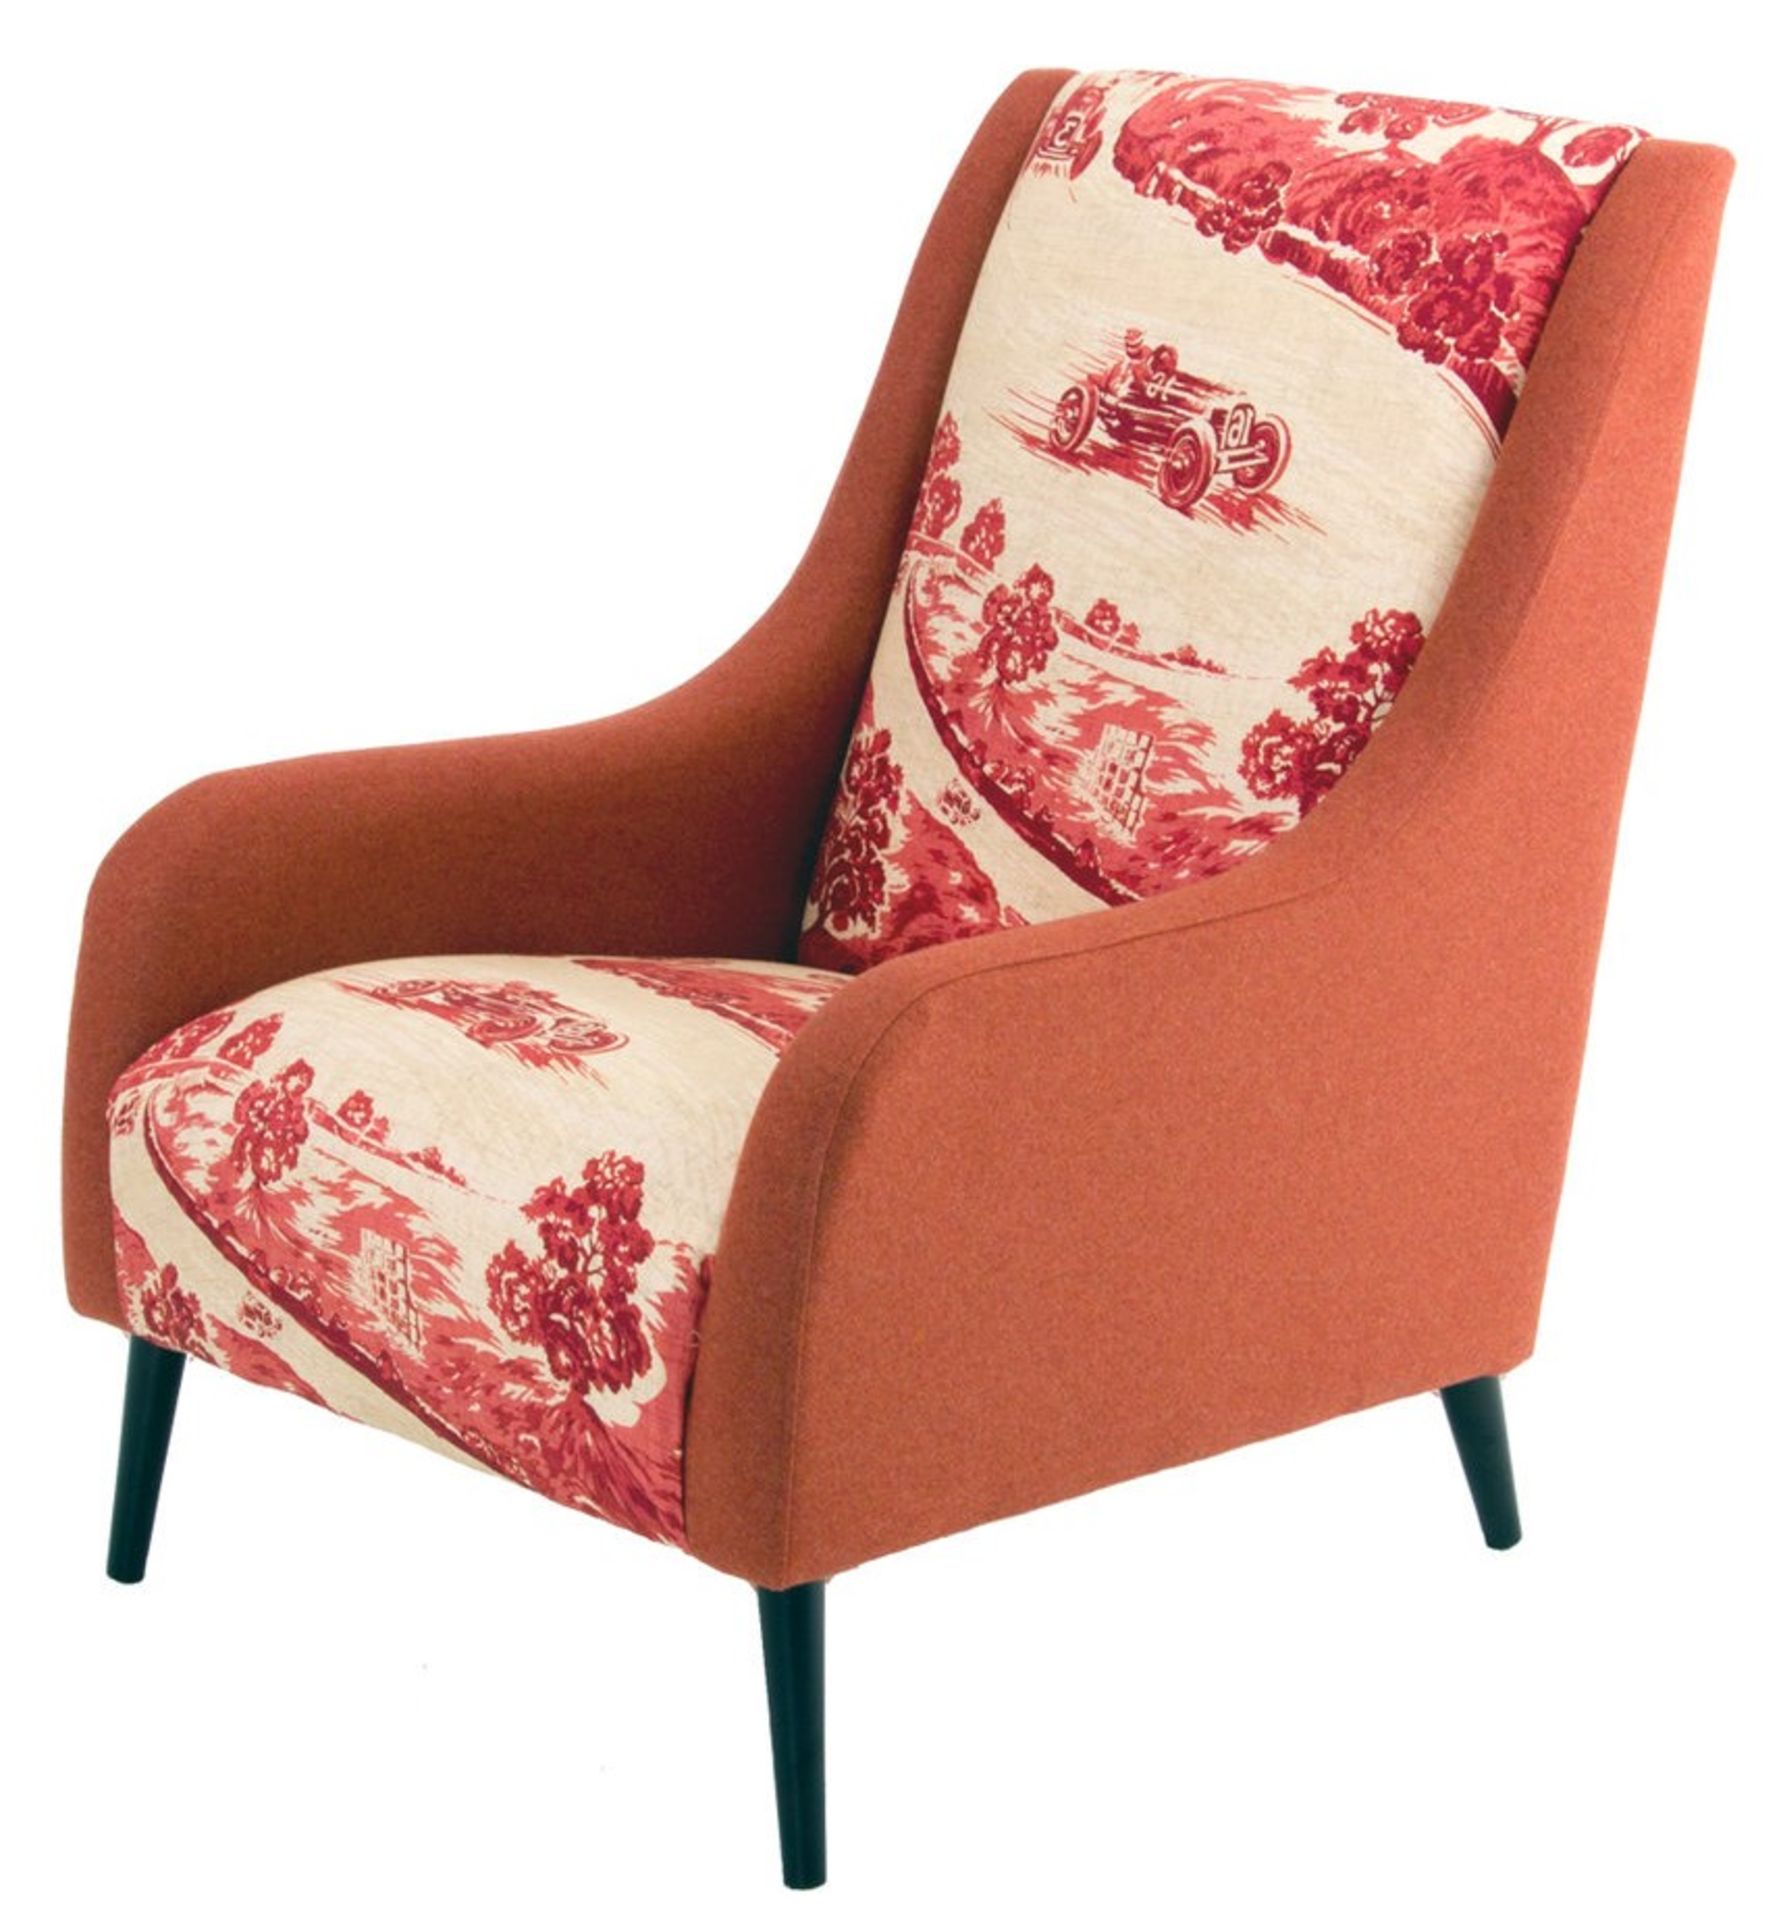 1 x Lauran Armchair Upholstered in Goodwood Race Car Fabric - RRP £779! - Image 2 of 7